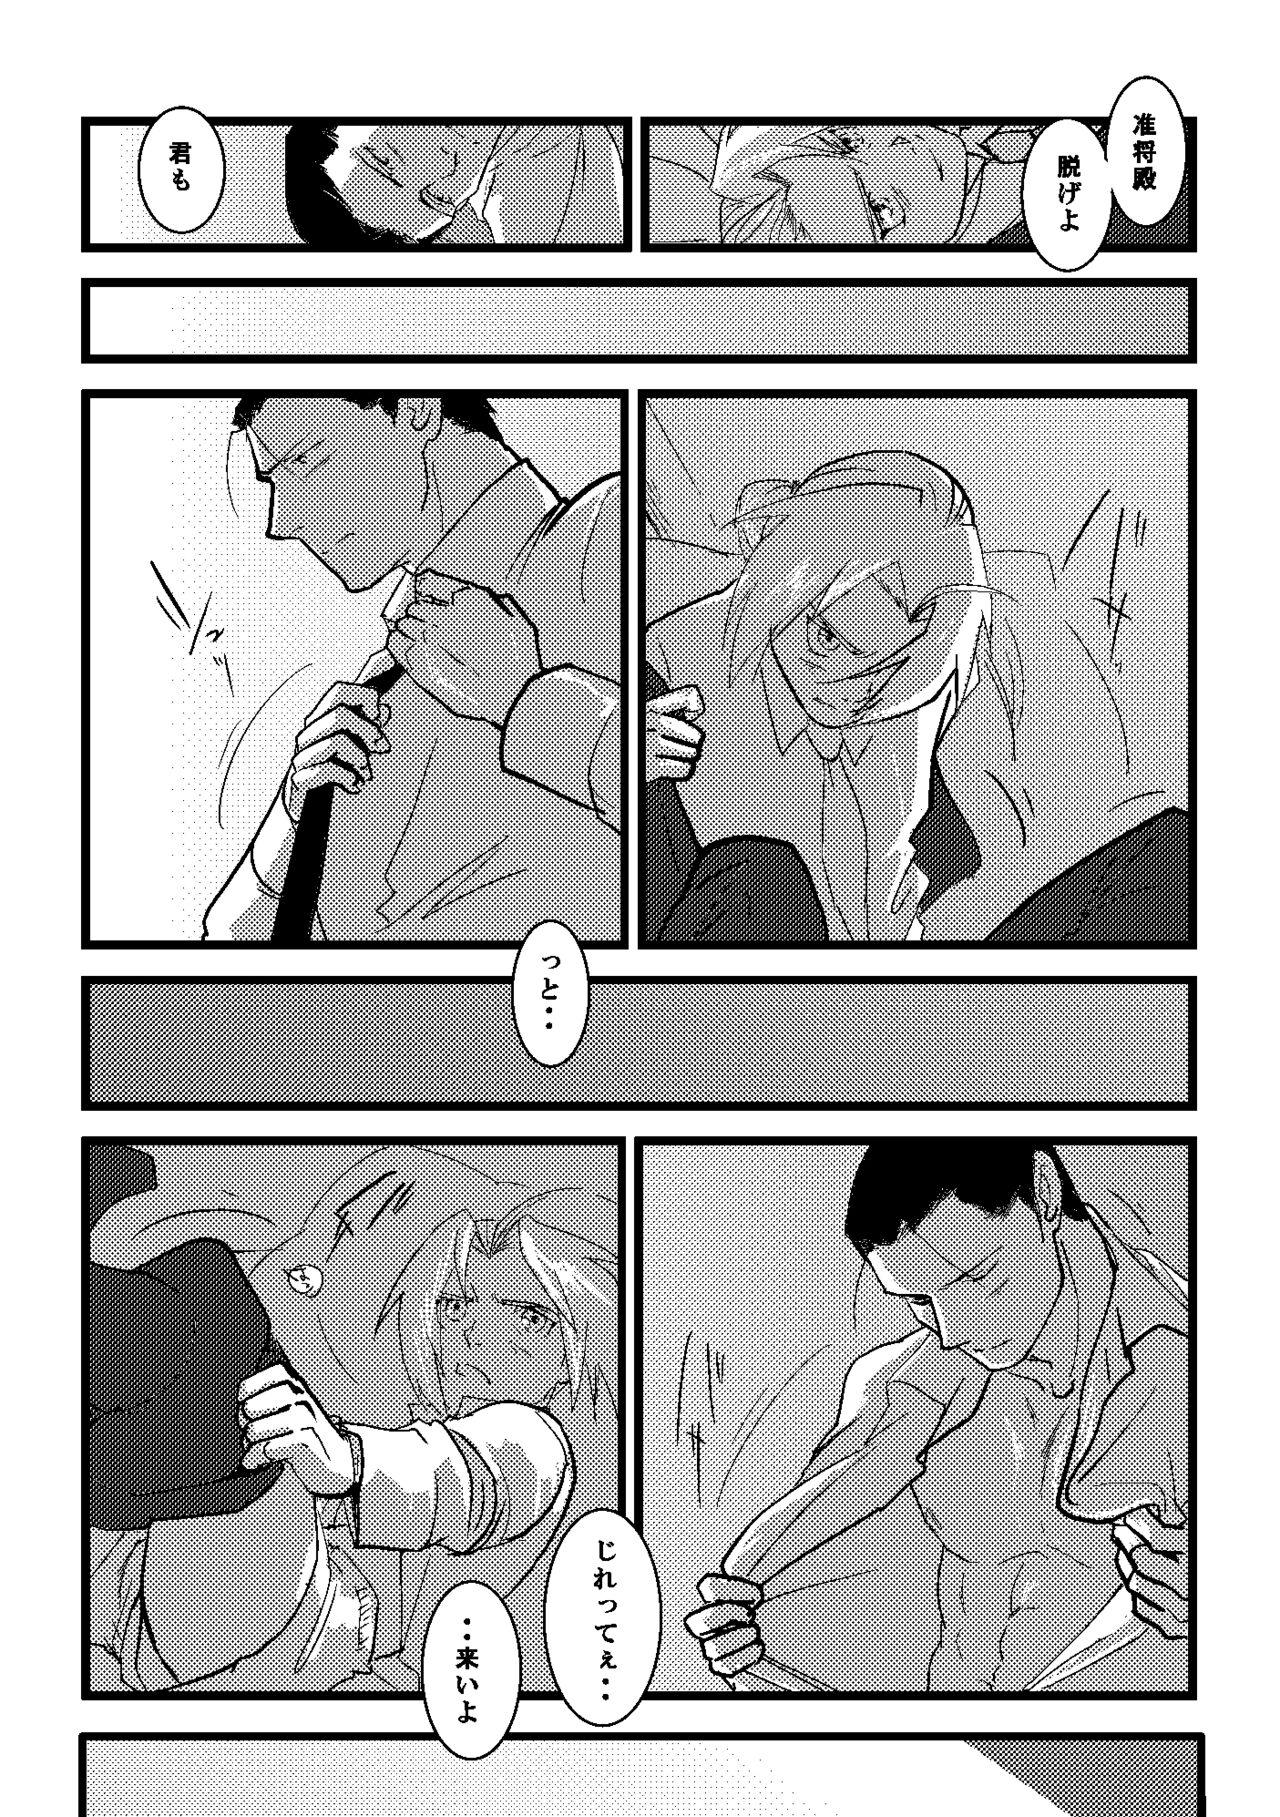 Butts After that and then - Fullmetal alchemist | hagane no renkinjutsushi Interacial - Page 6